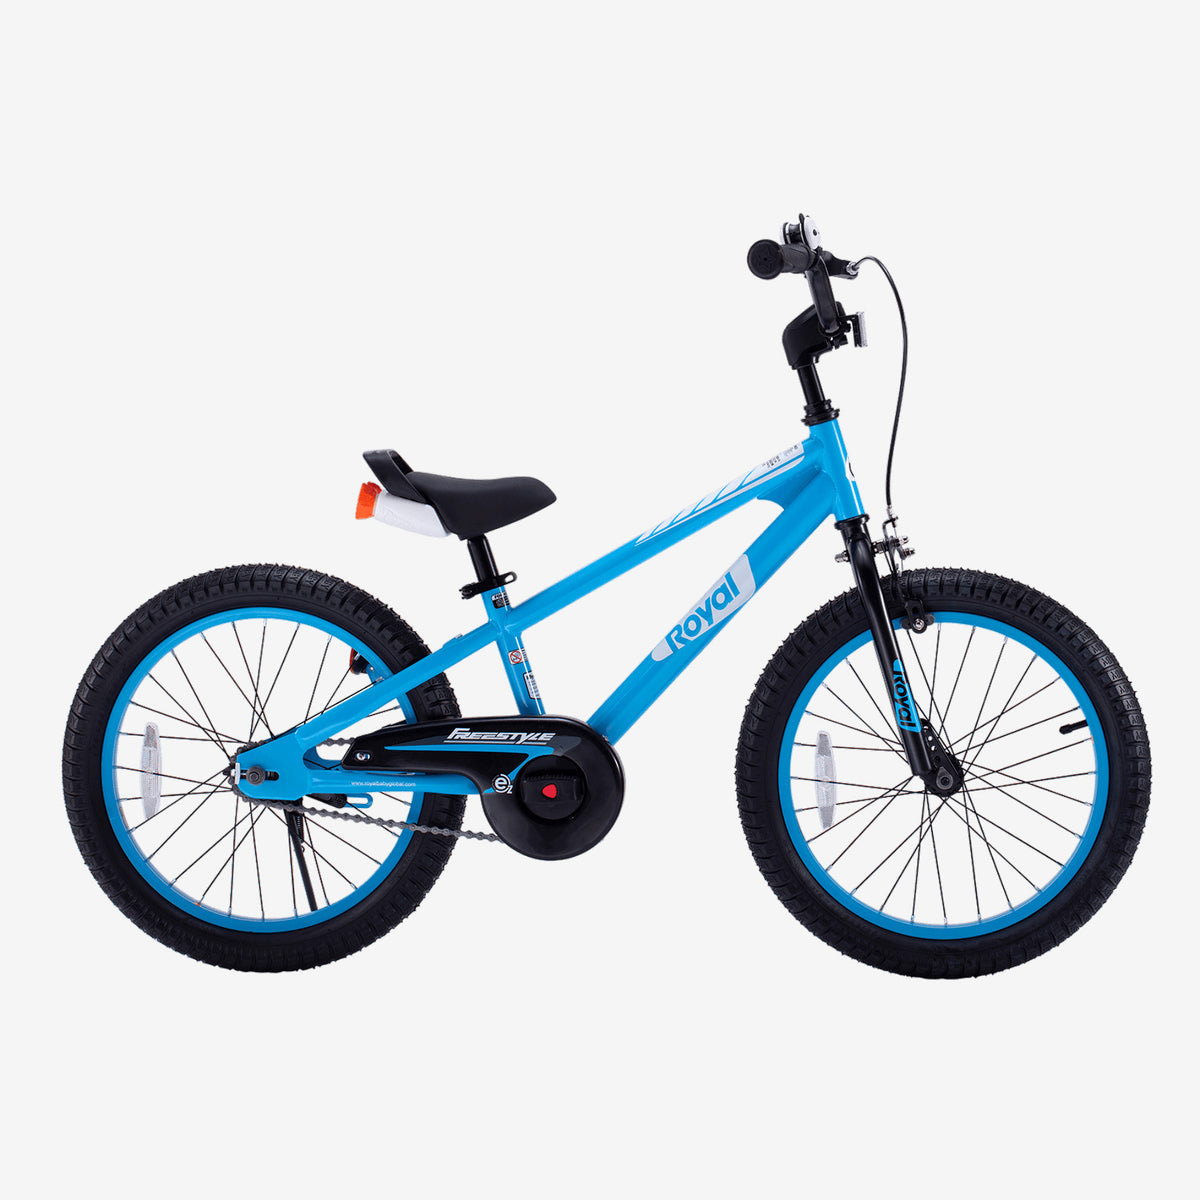 RoyalBaby EZ Kids Bike Easy Learn Balancing to Biking Balance & Pedal Bicycle Instant Assembly for Boys Girls Ages 2-9 Years Multiple Color